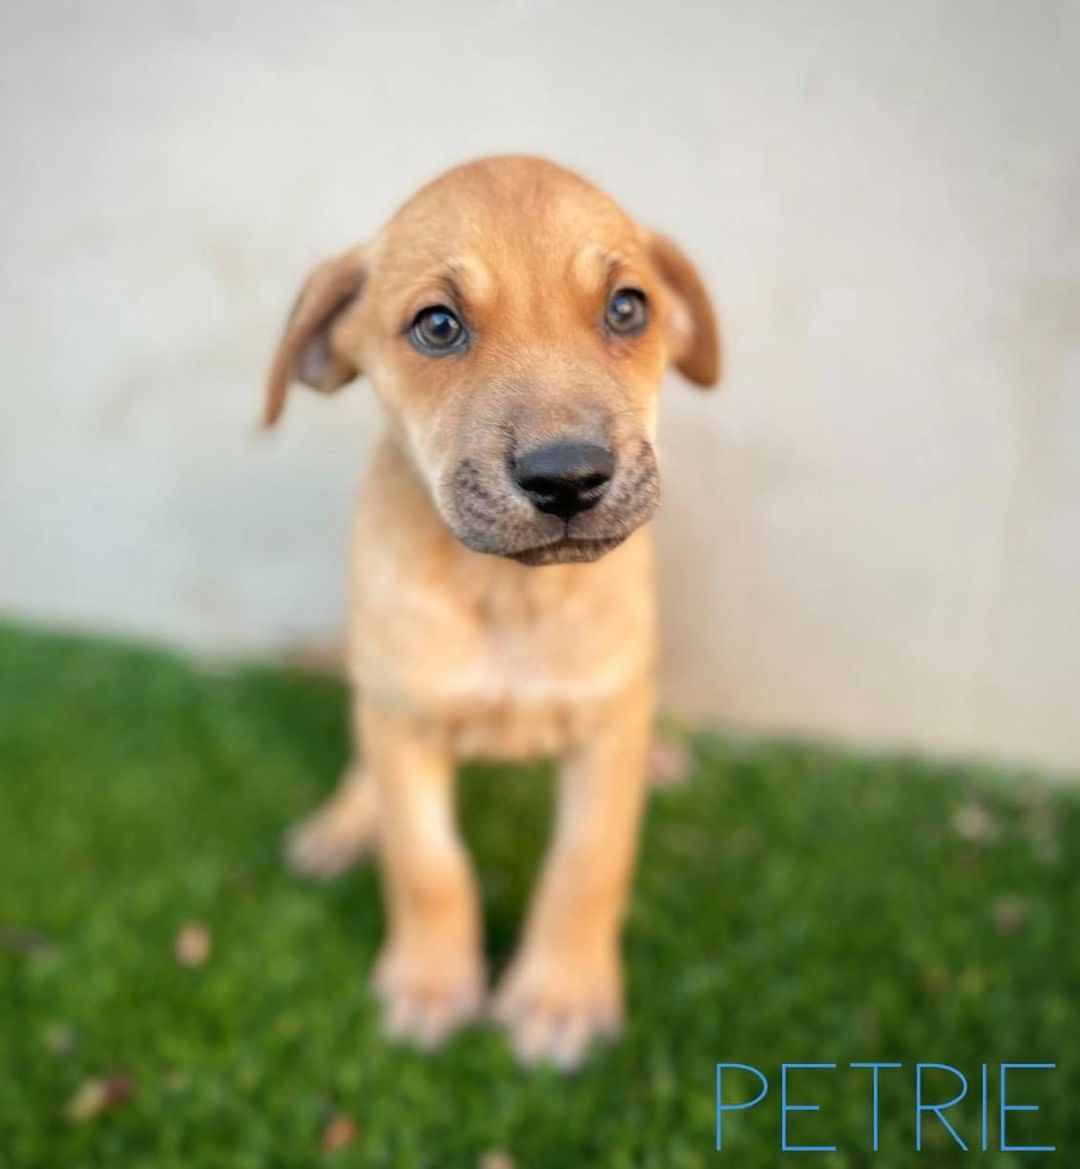 Join us on the adventure of a lifetime with one of these Land Before Time Puppies! 🦕 

They have embarked on the journey of finding their forever homes and they need your help! If you’ve been looking for lots of fun and adorable personalities, then we might have the perfect baby dinosaur for you! 

They are medium mixed breed puppies and guessed to be around 40-60 pounds full grown. 

Whether you are looking for an intelligent and playful pup like Littlefoot, or a sweet and optimistic personality like Ducky, head on over to our website to fill out an adoption application! 
www.hillcountryspca.com